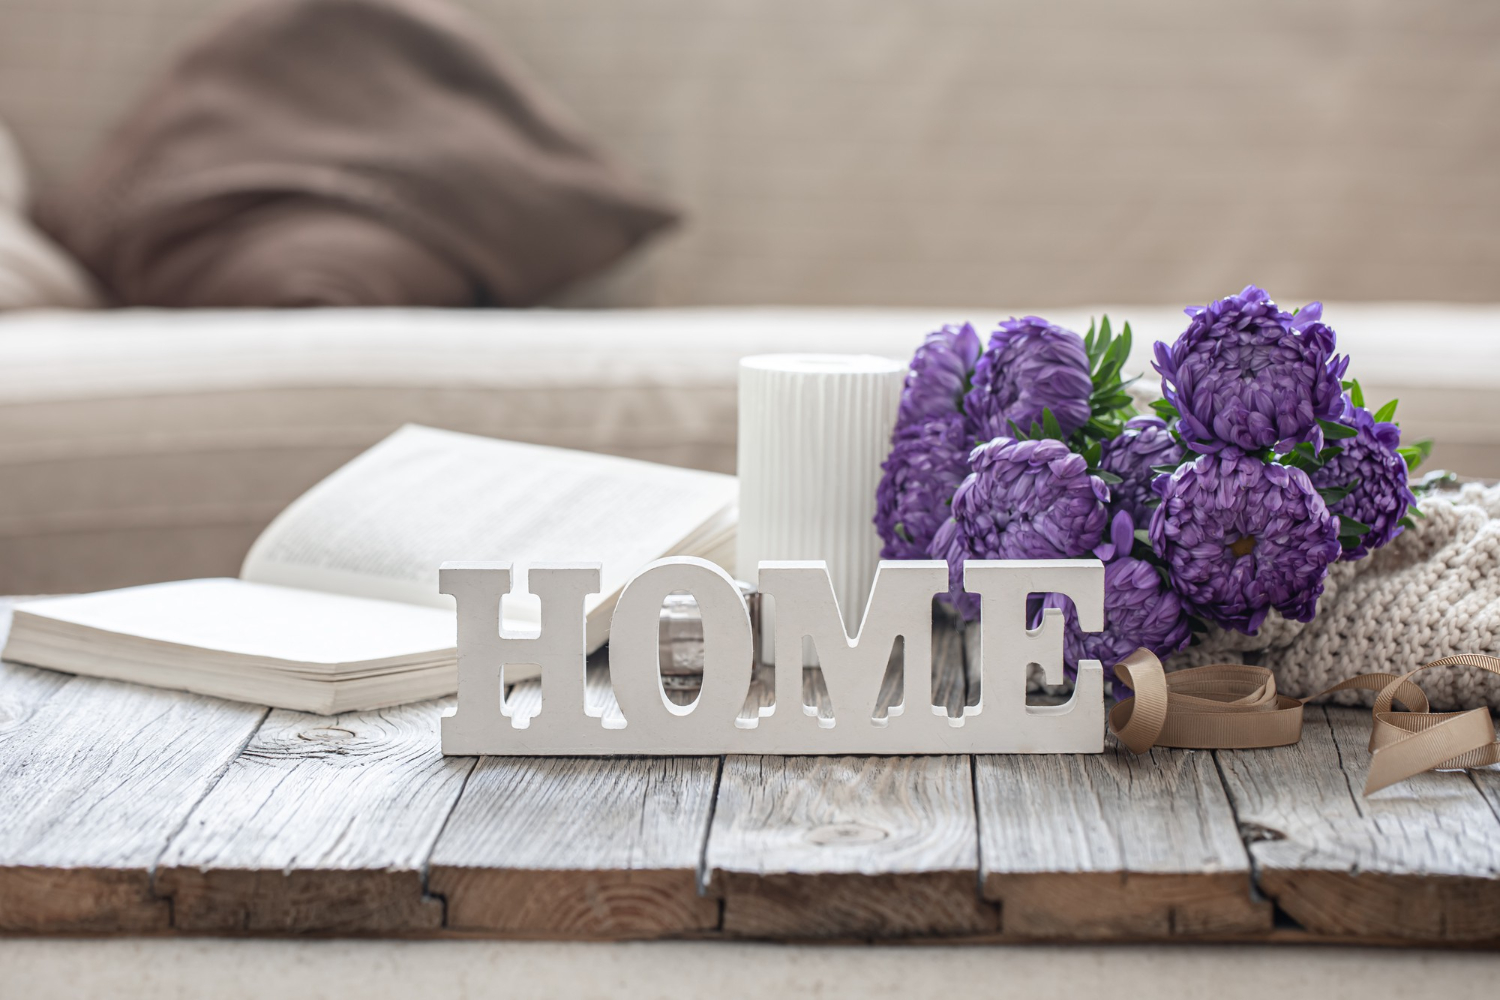 cozy-background-with-decorative-word-home-chrysanthemum-bouquet-book-candle.jpg